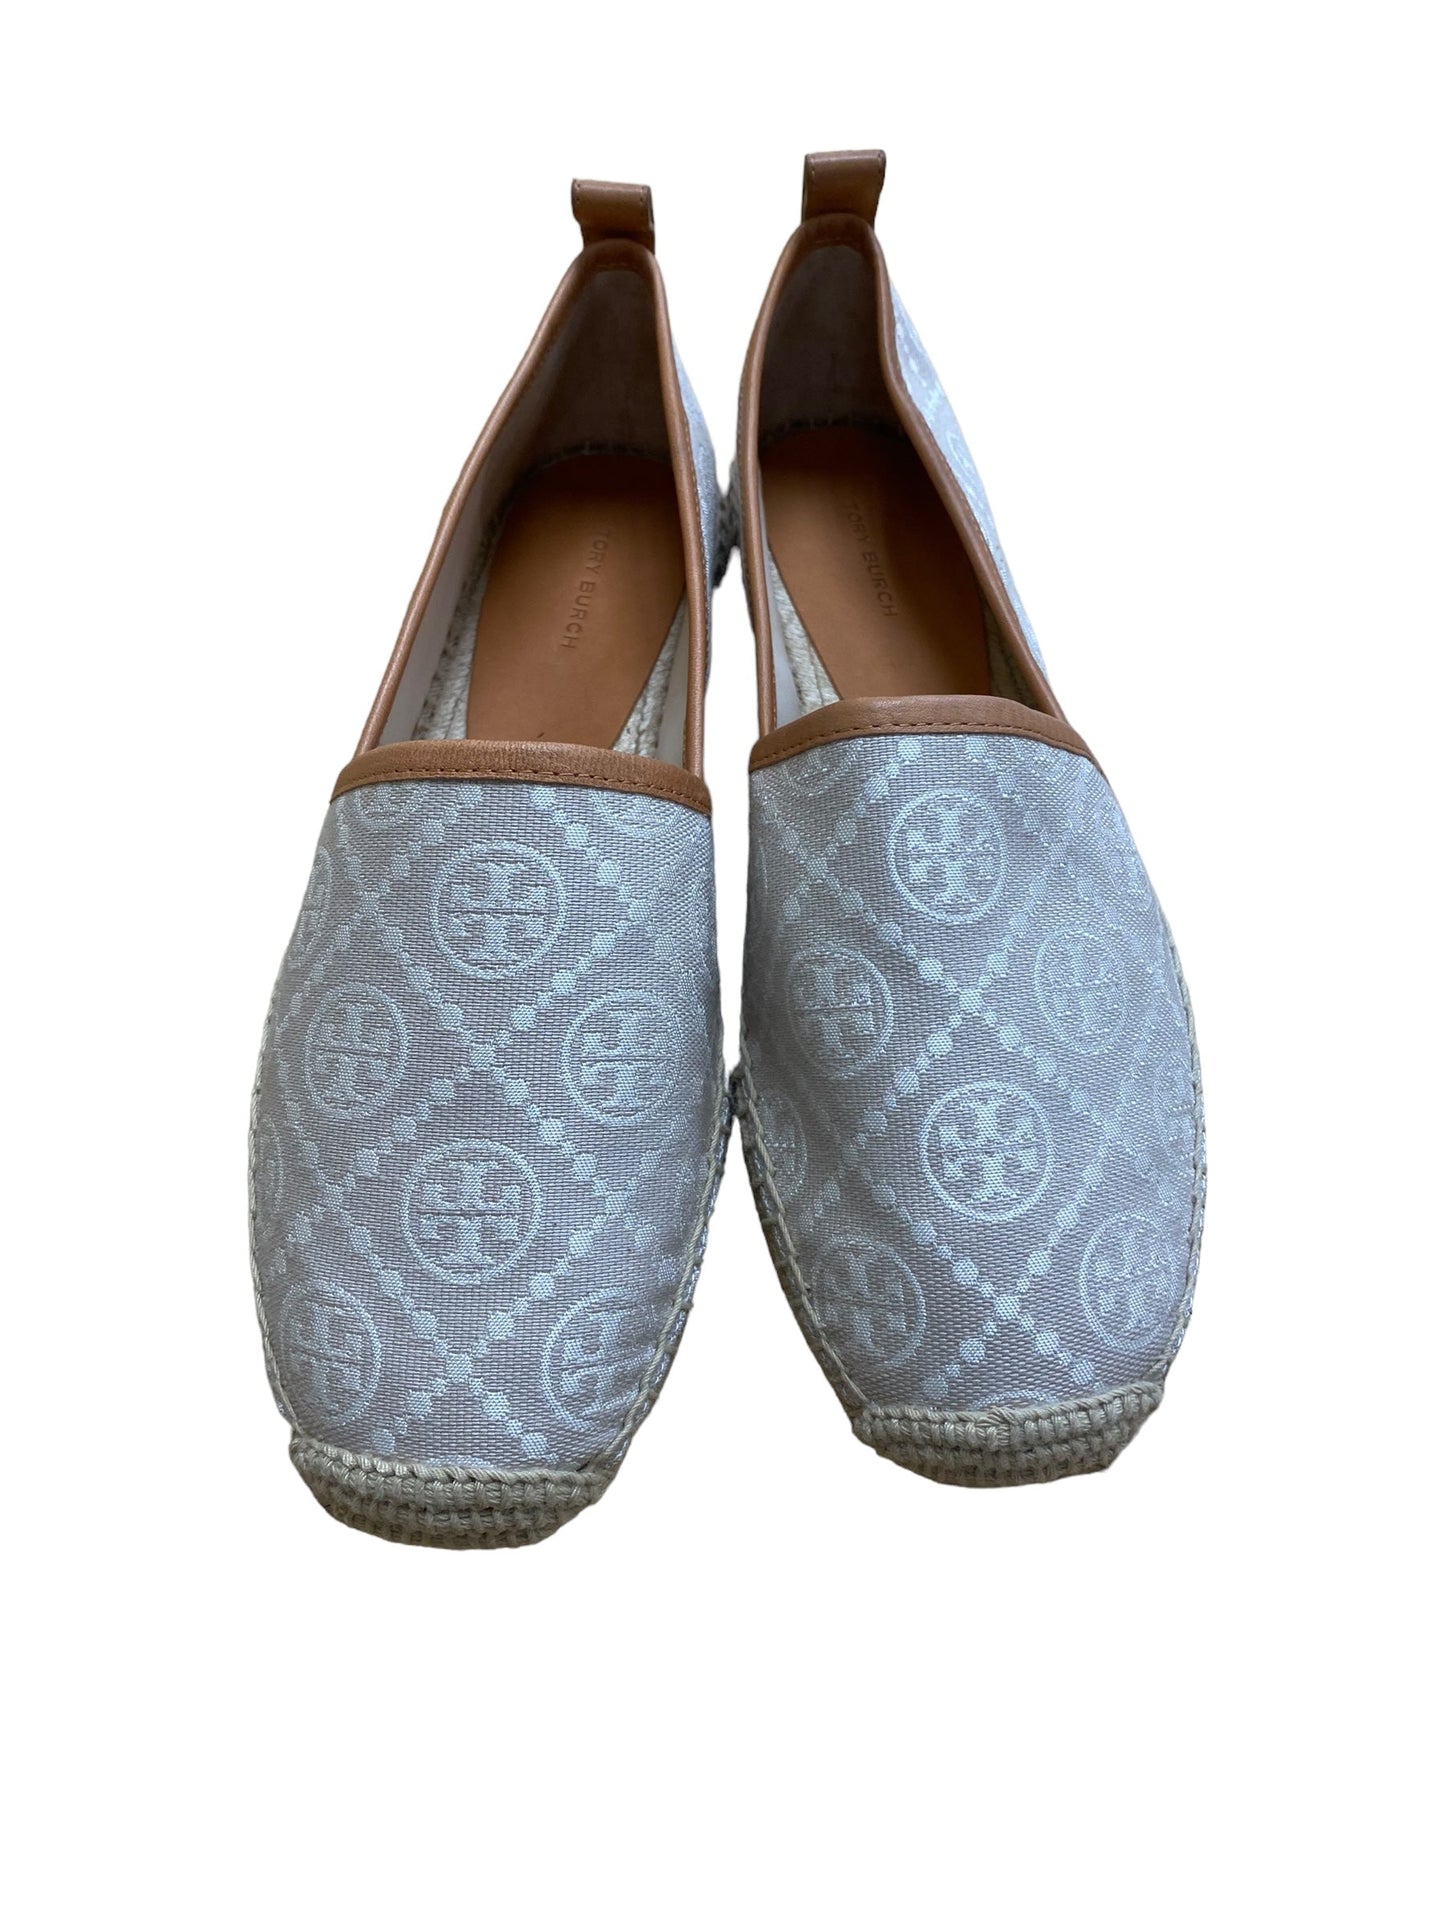 Shoes Flats By Tory Burch  Size: 9